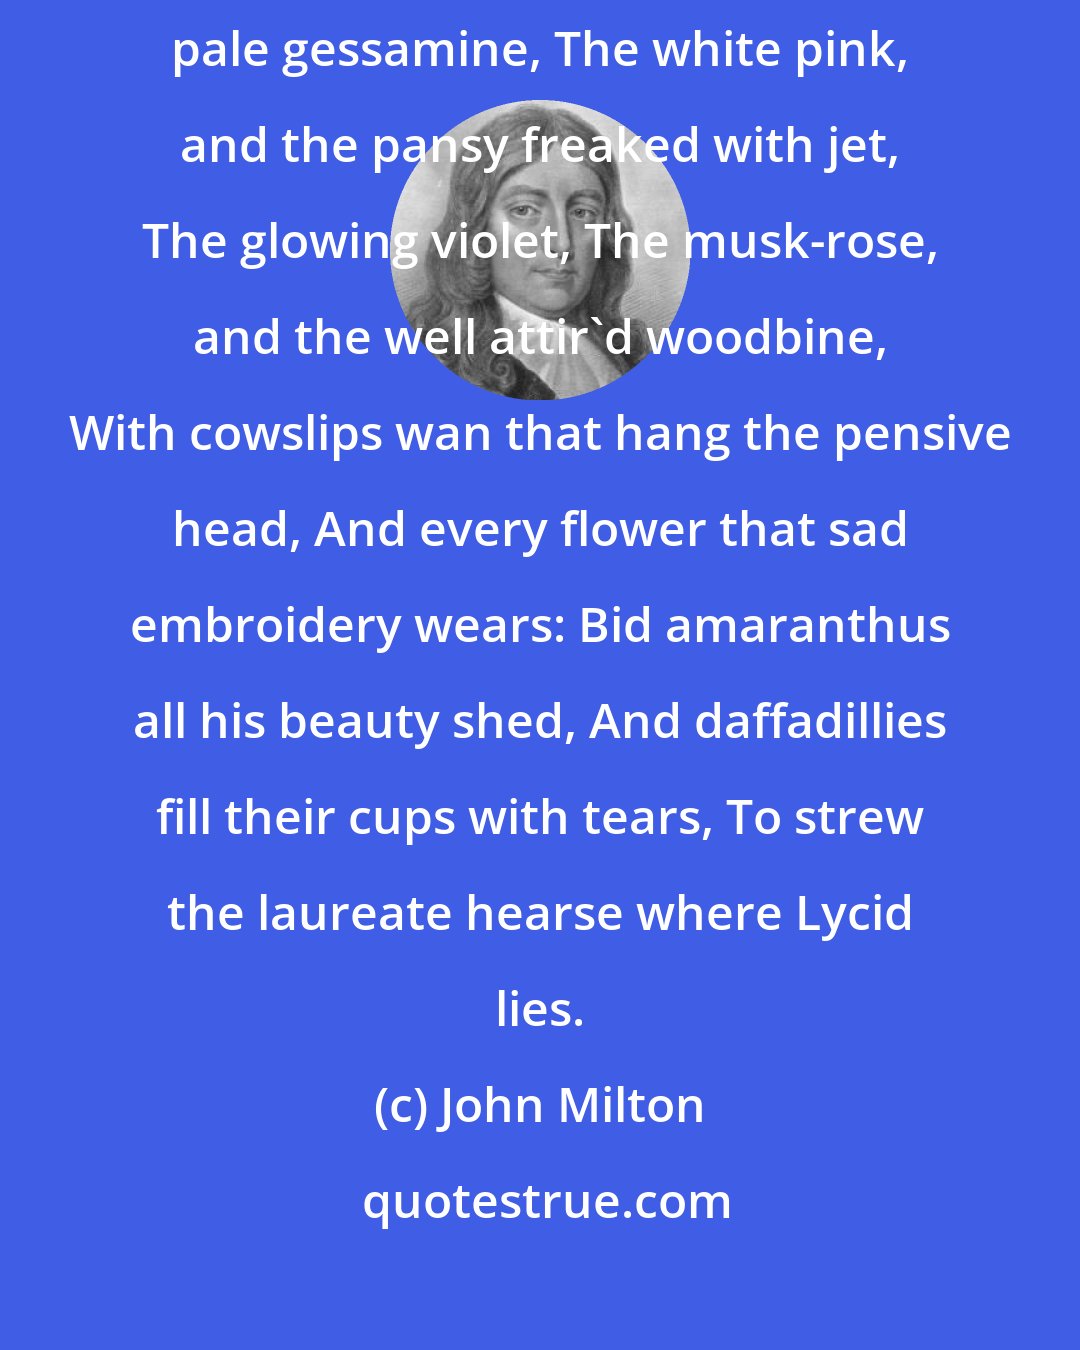 John Milton: Bring the rathe primrose that forsaken dies, The tufted crow-toe, and pale gessamine, The white pink, and the pansy freaked with jet, The glowing violet, The musk-rose, and the well attir'd woodbine, With cowslips wan that hang the pensive head, And every flower that sad embroidery wears: Bid amaranthus all his beauty shed, And daffadillies fill their cups with tears, To strew the laureate hearse where Lycid lies.